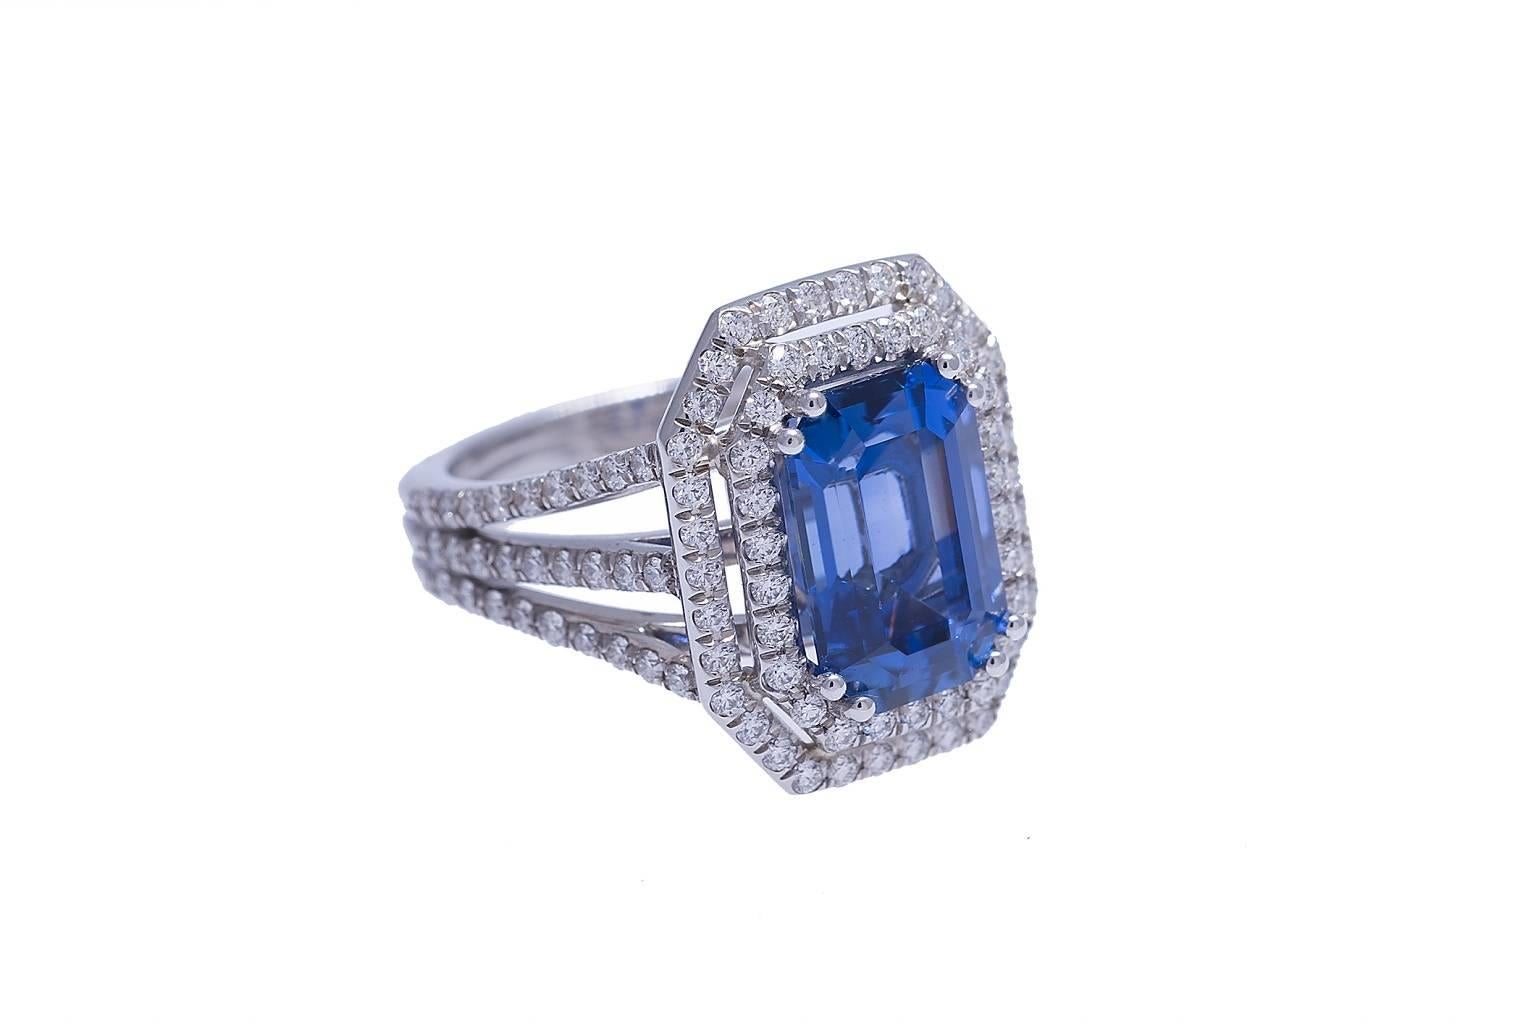 Platinum cocktail ring containing one emerald cut sapphire weighing 4.34 carats and one hundred fourteen diamonds weighing combined 0.79 carat. The sapphire has a highly desirable shade of blue with very good saturation. The diamonds are G color, VS